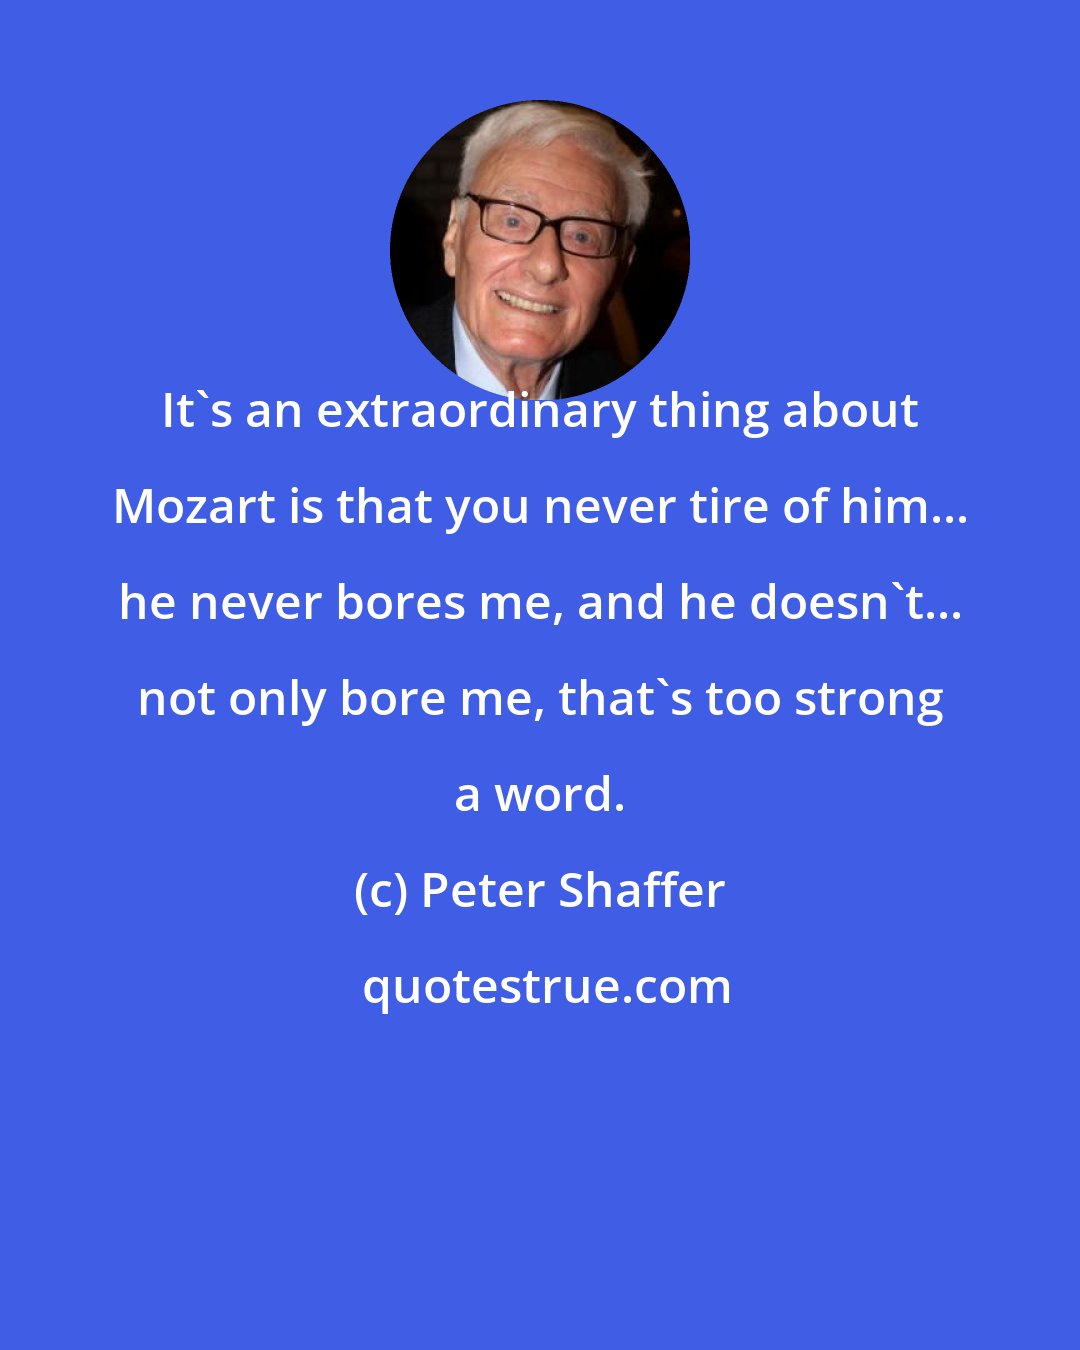 Peter Shaffer: It's an extraordinary thing about Mozart is that you never tire of him... he never bores me, and he doesn't... not only bore me, that's too strong a word.